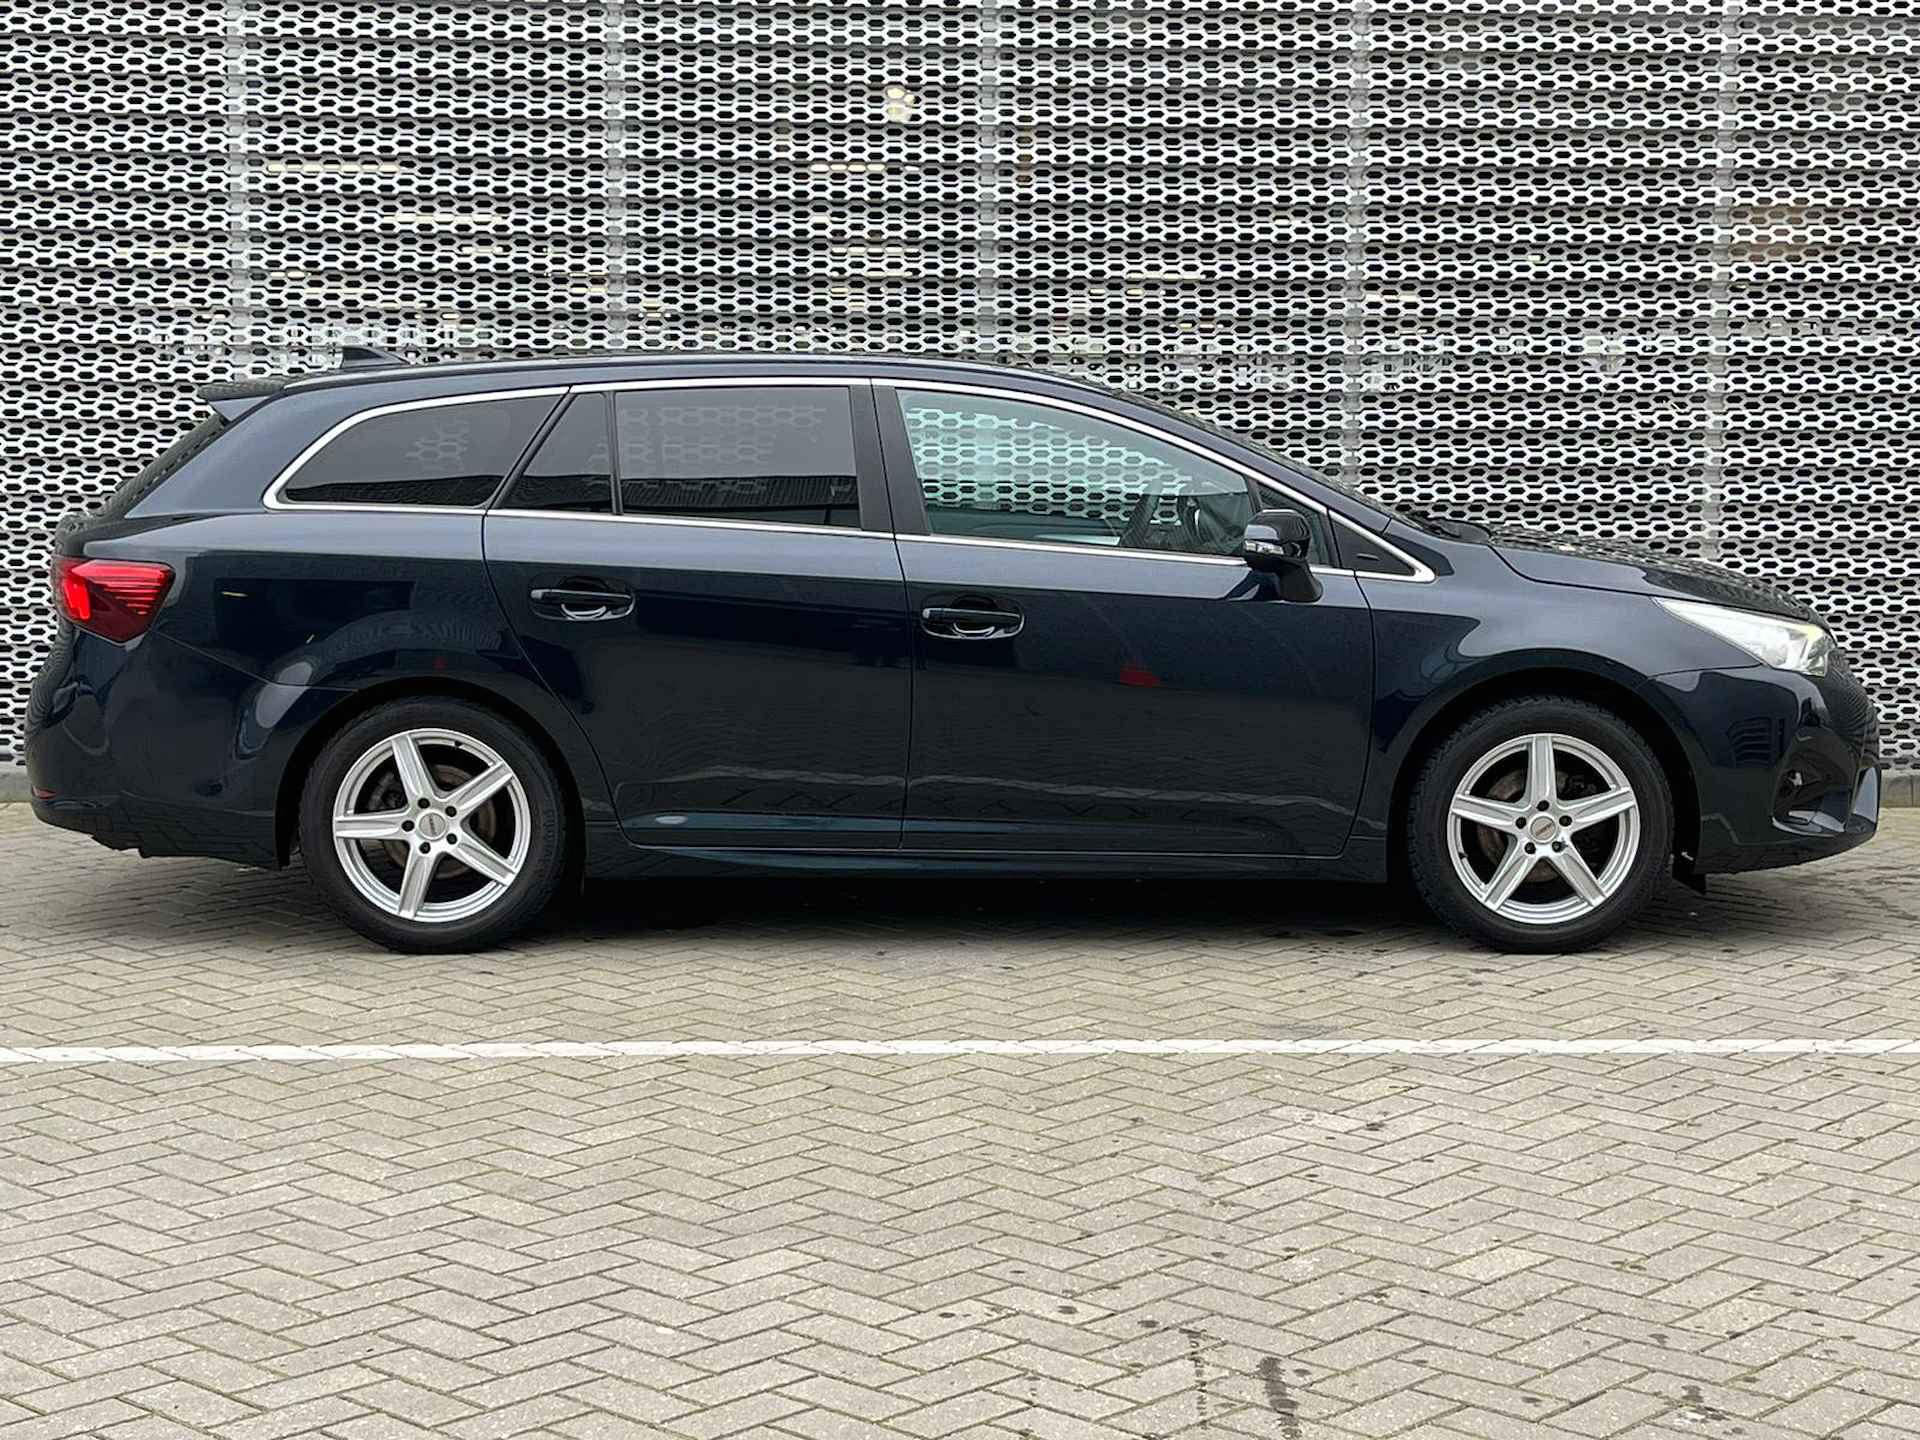 Toyota Avensis Touring Sports 1.8 VVT-i SkyView Edition - 9/28